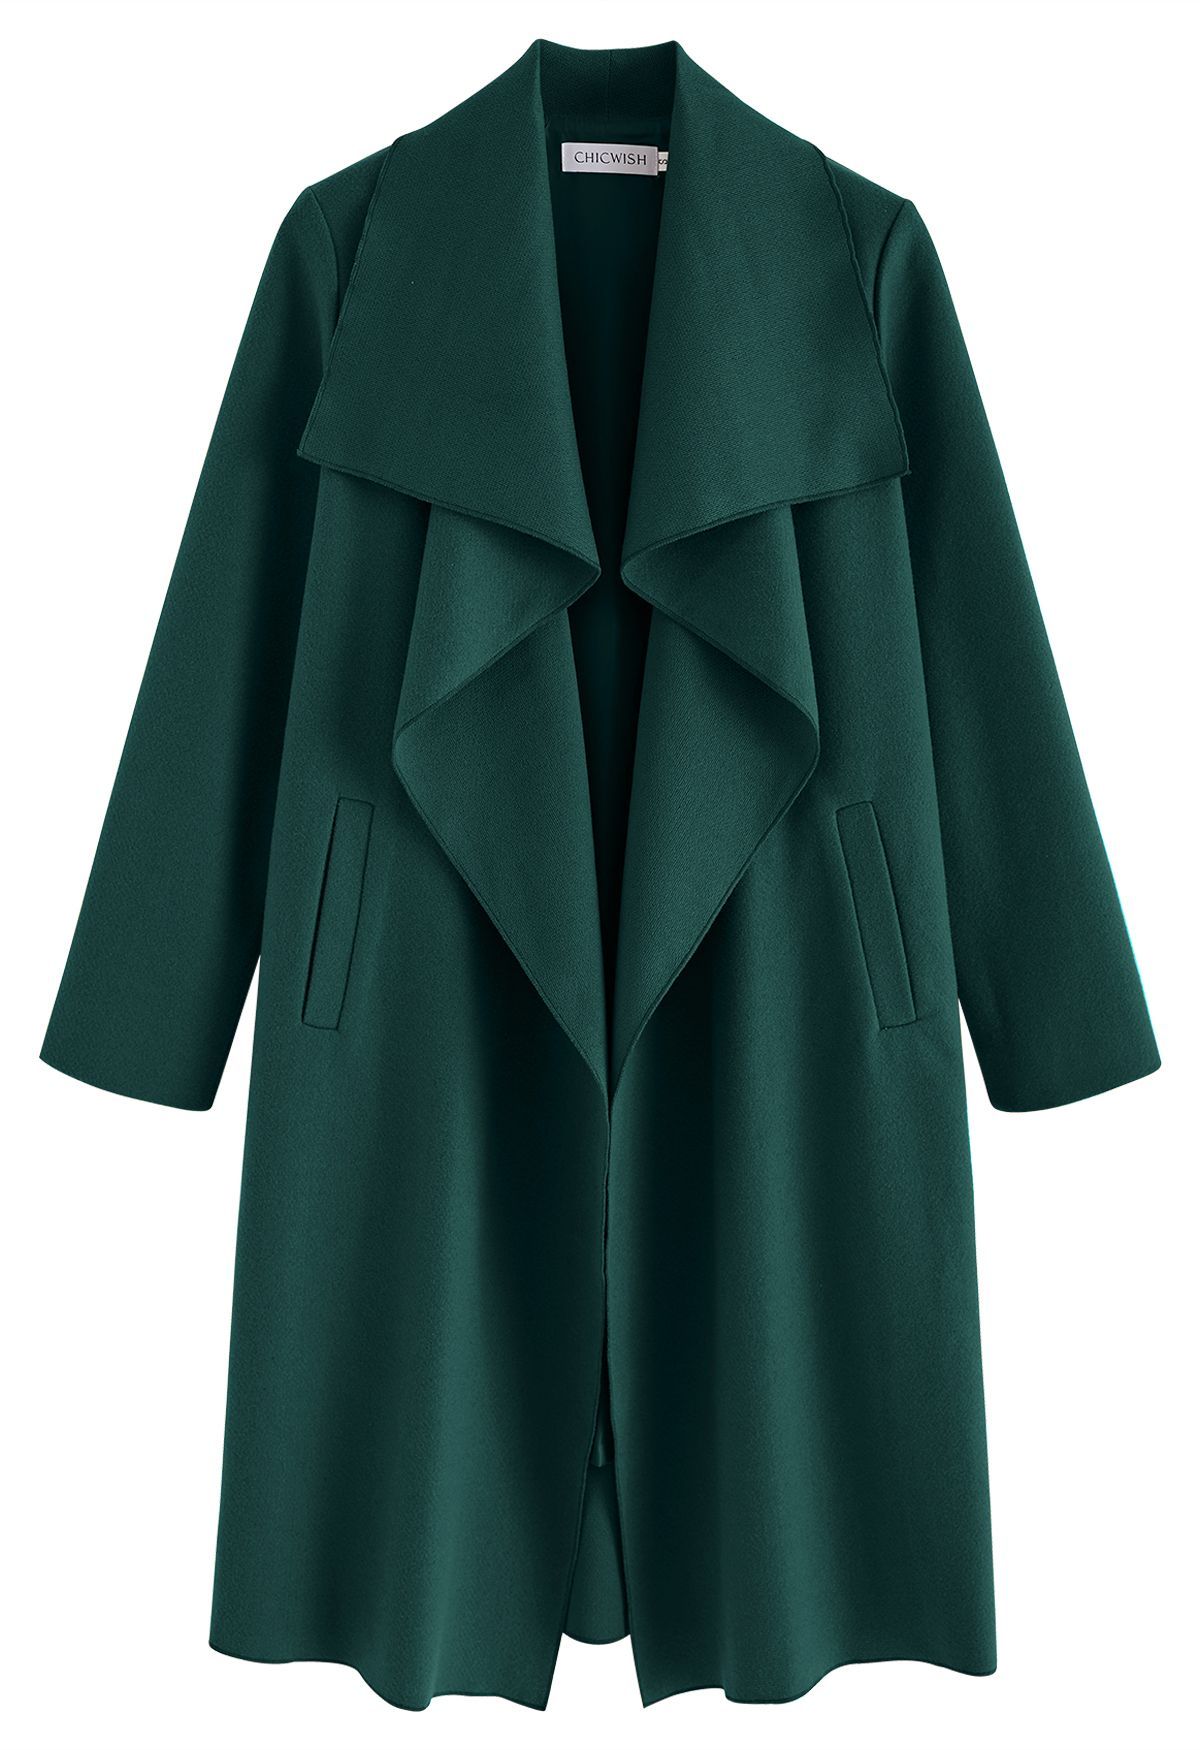 Free Myself Open Front Wool-Blend Coat in Emerald | Chicwish